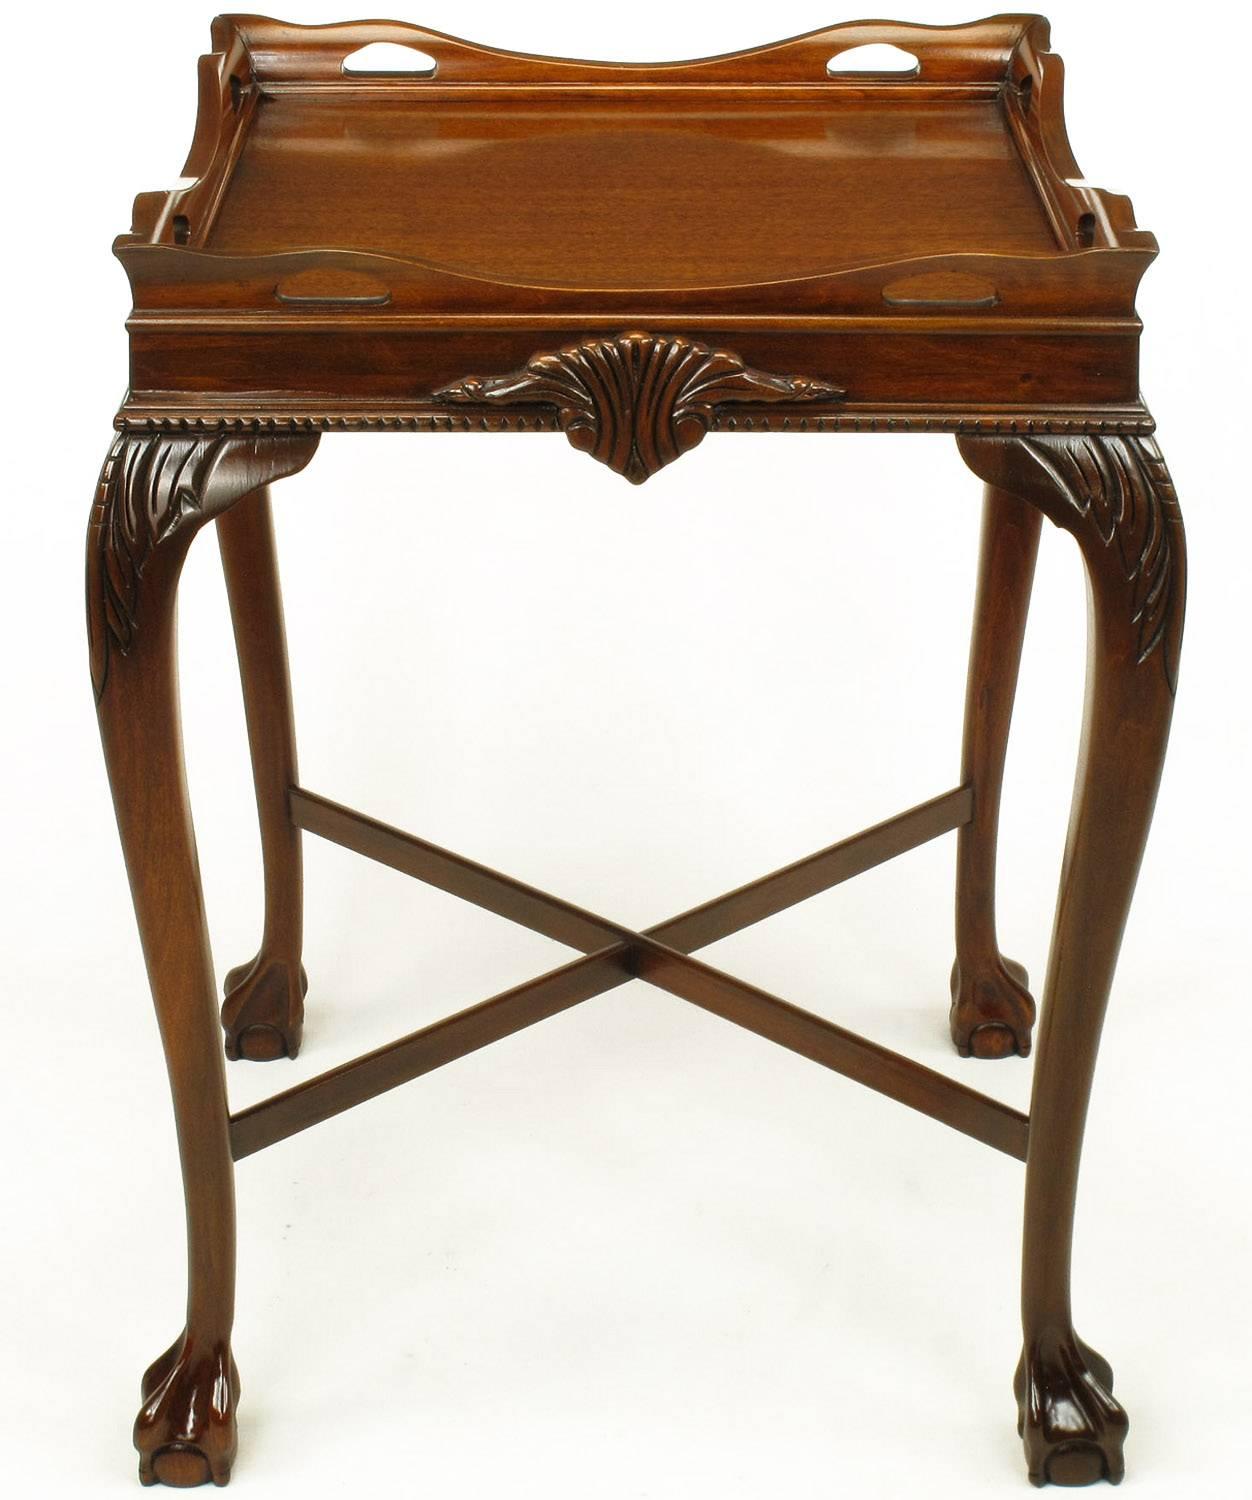 Expertly carved mahogany ball and claw footed tables in the style of George ll.
Cabriole legs, pierced mahogany gallery, X-stretchers and carved front and back pediment.